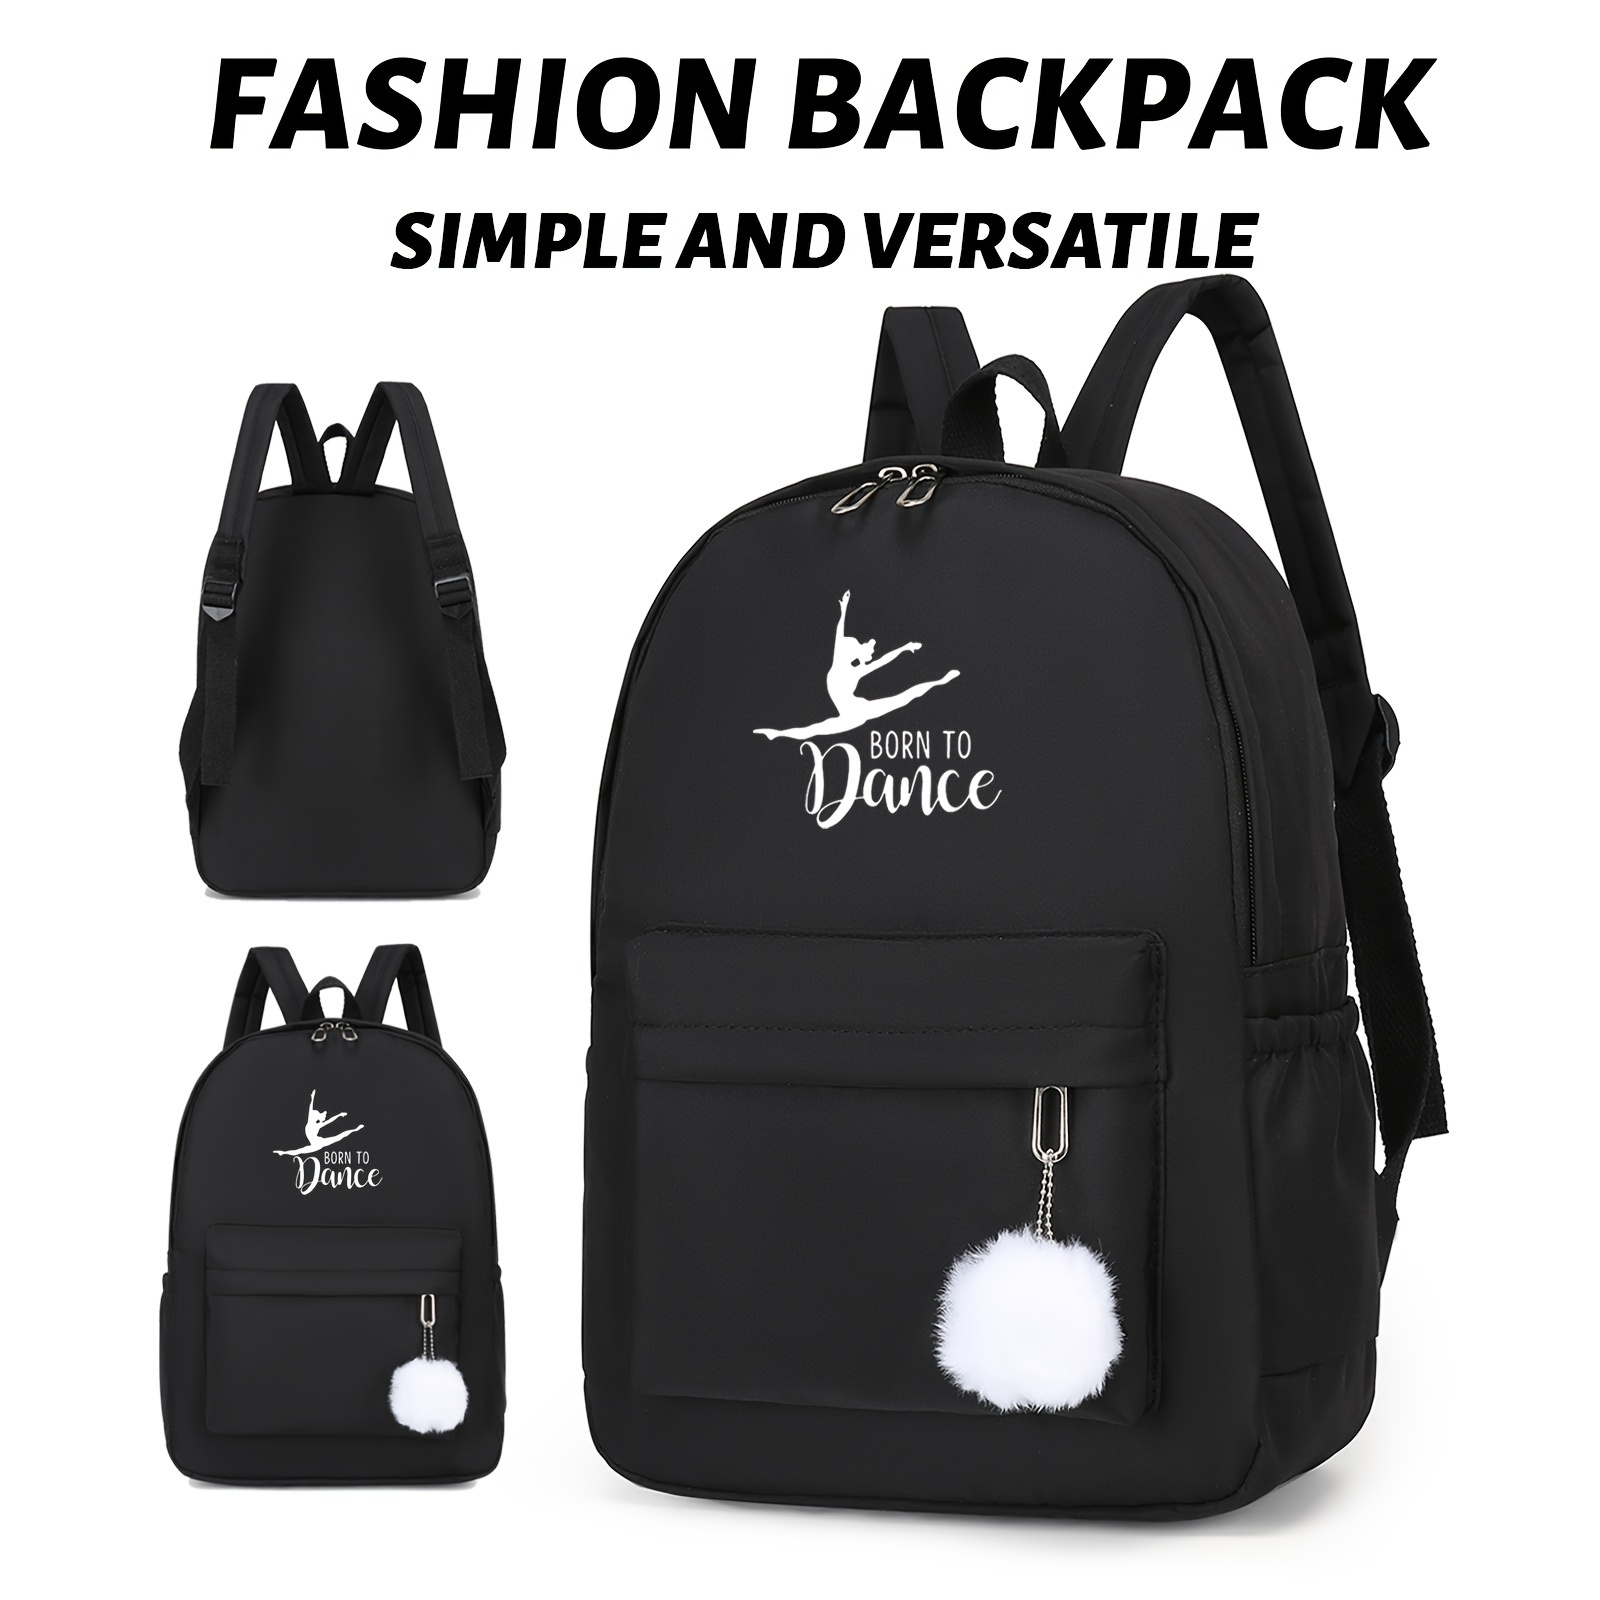 

Dancing Woman And Letter Print Stylish And Versatile Black Backpack, Perfect For Travel With Its Large Capacity, Multi Functional Backpack, Suitable For Women And Men, Can Be Used For Various Purposes